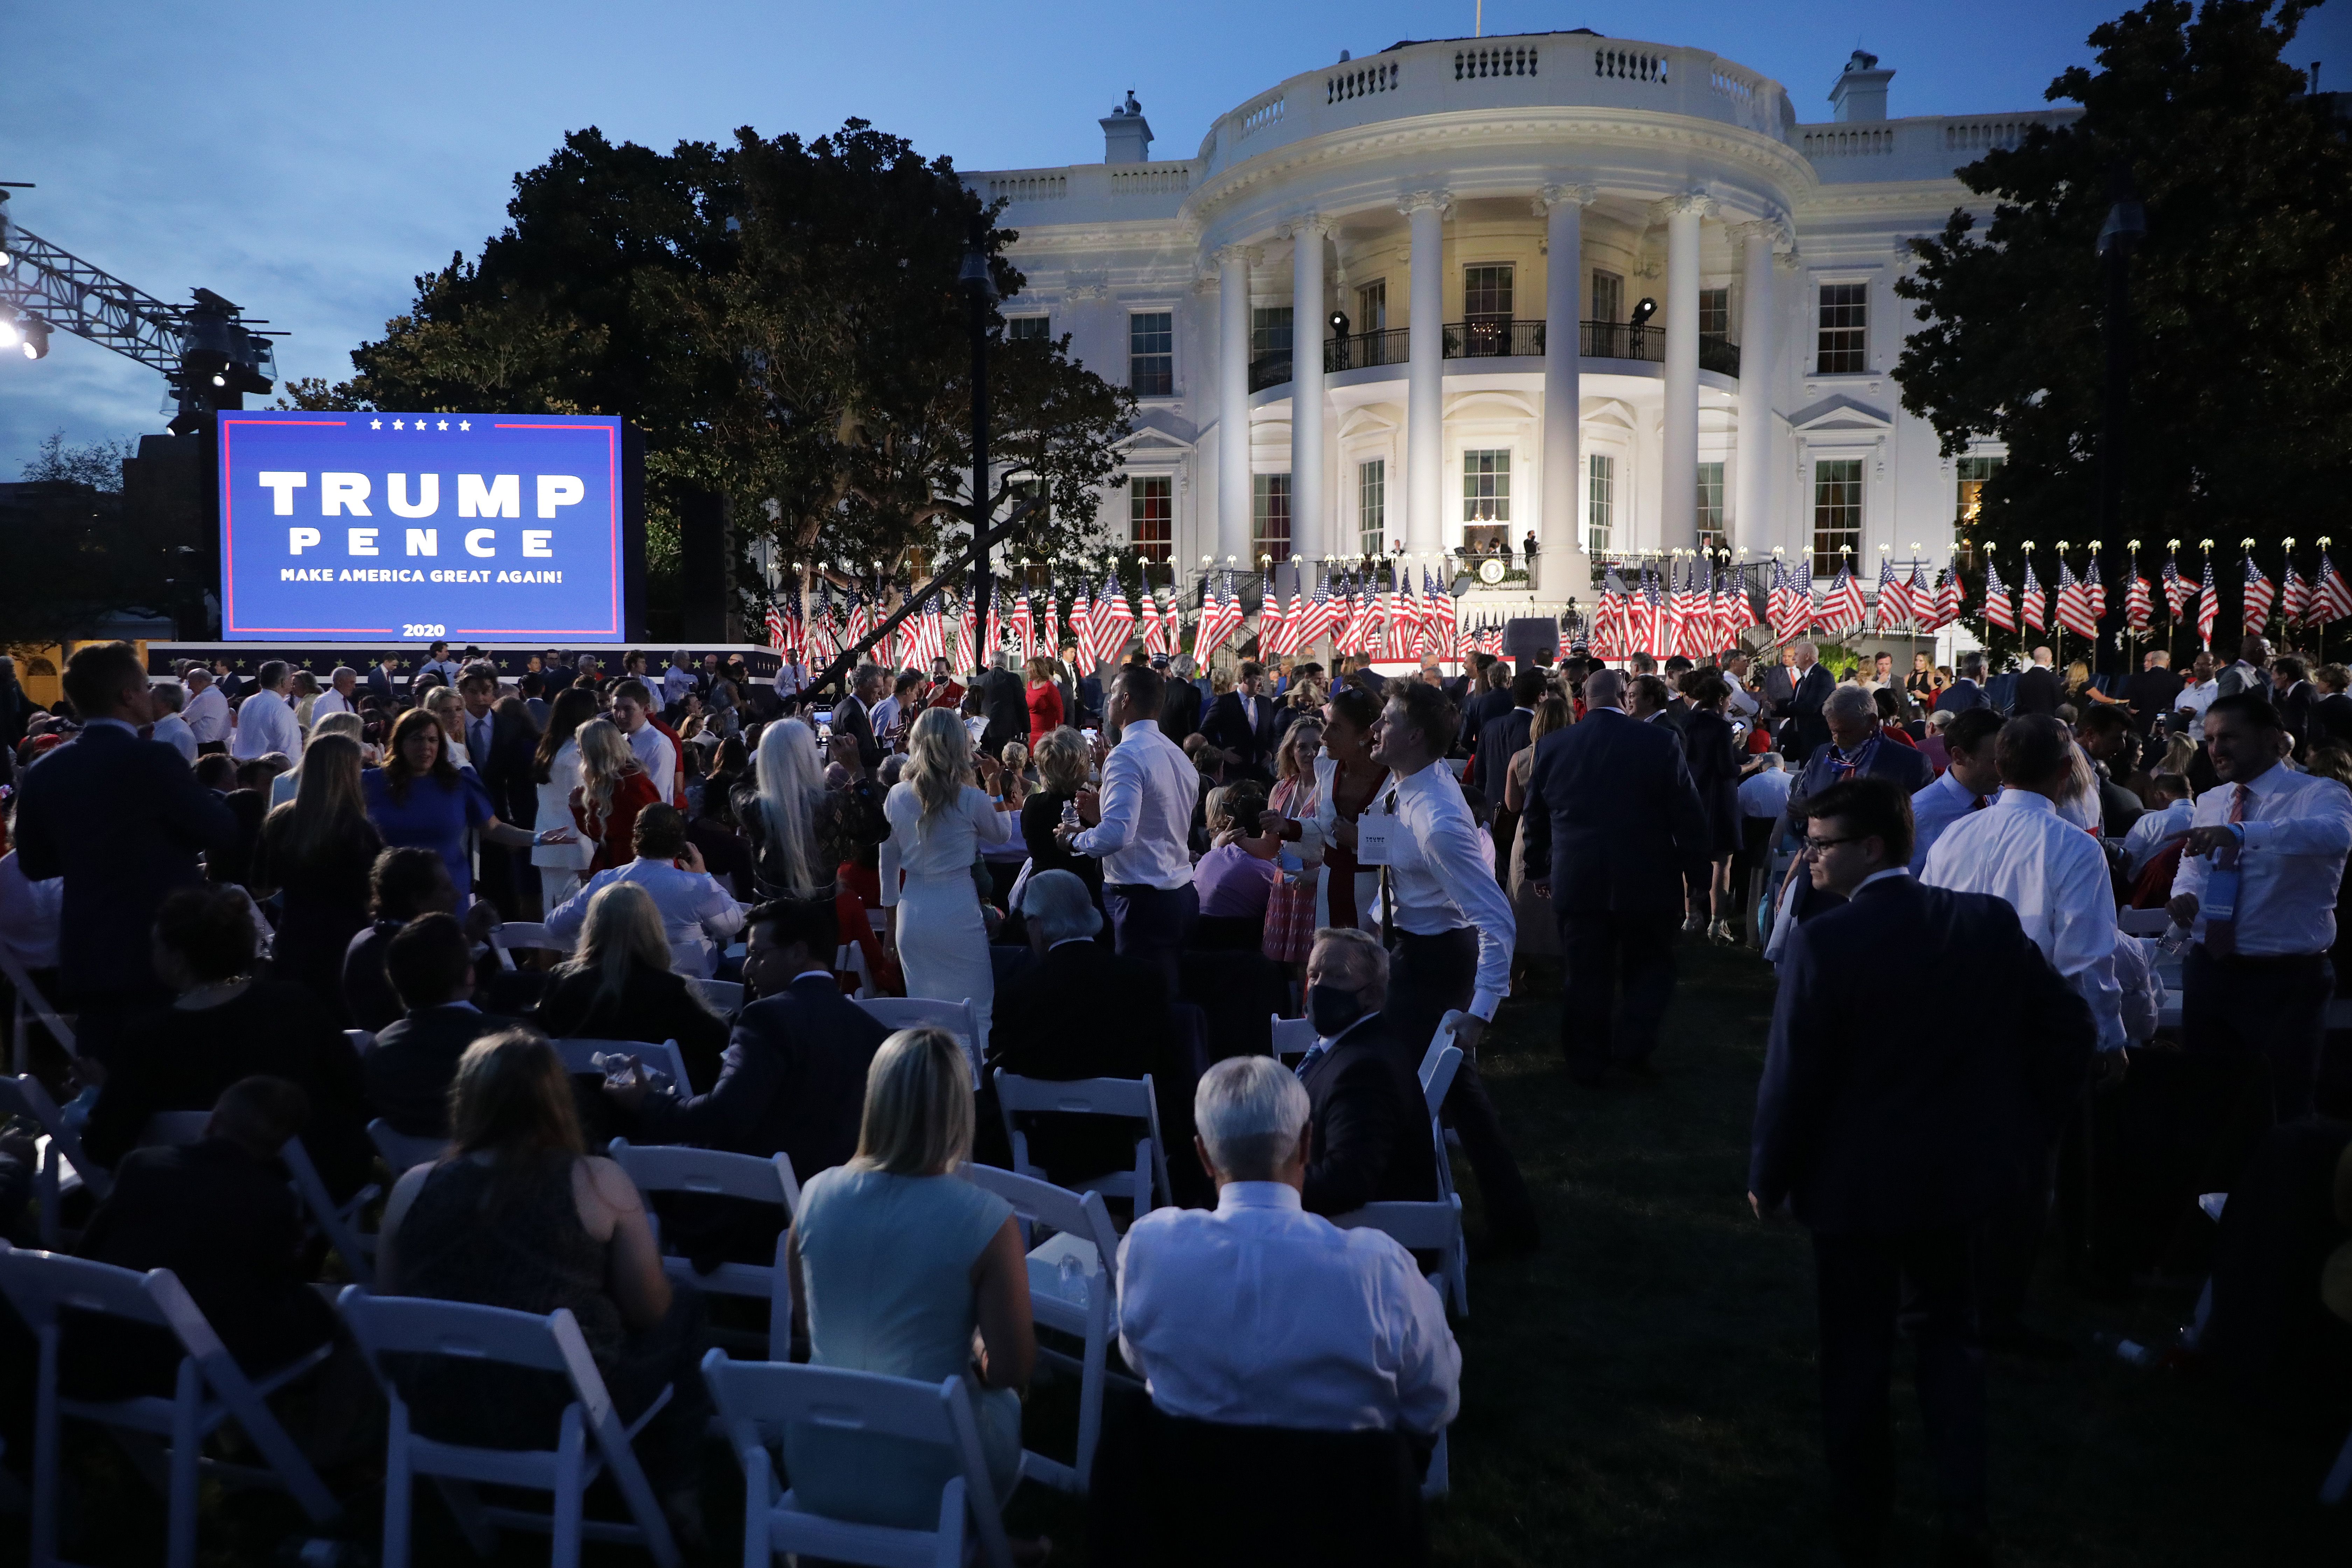 Guests gathered on the South Lawn of the White House for Trump's speech.